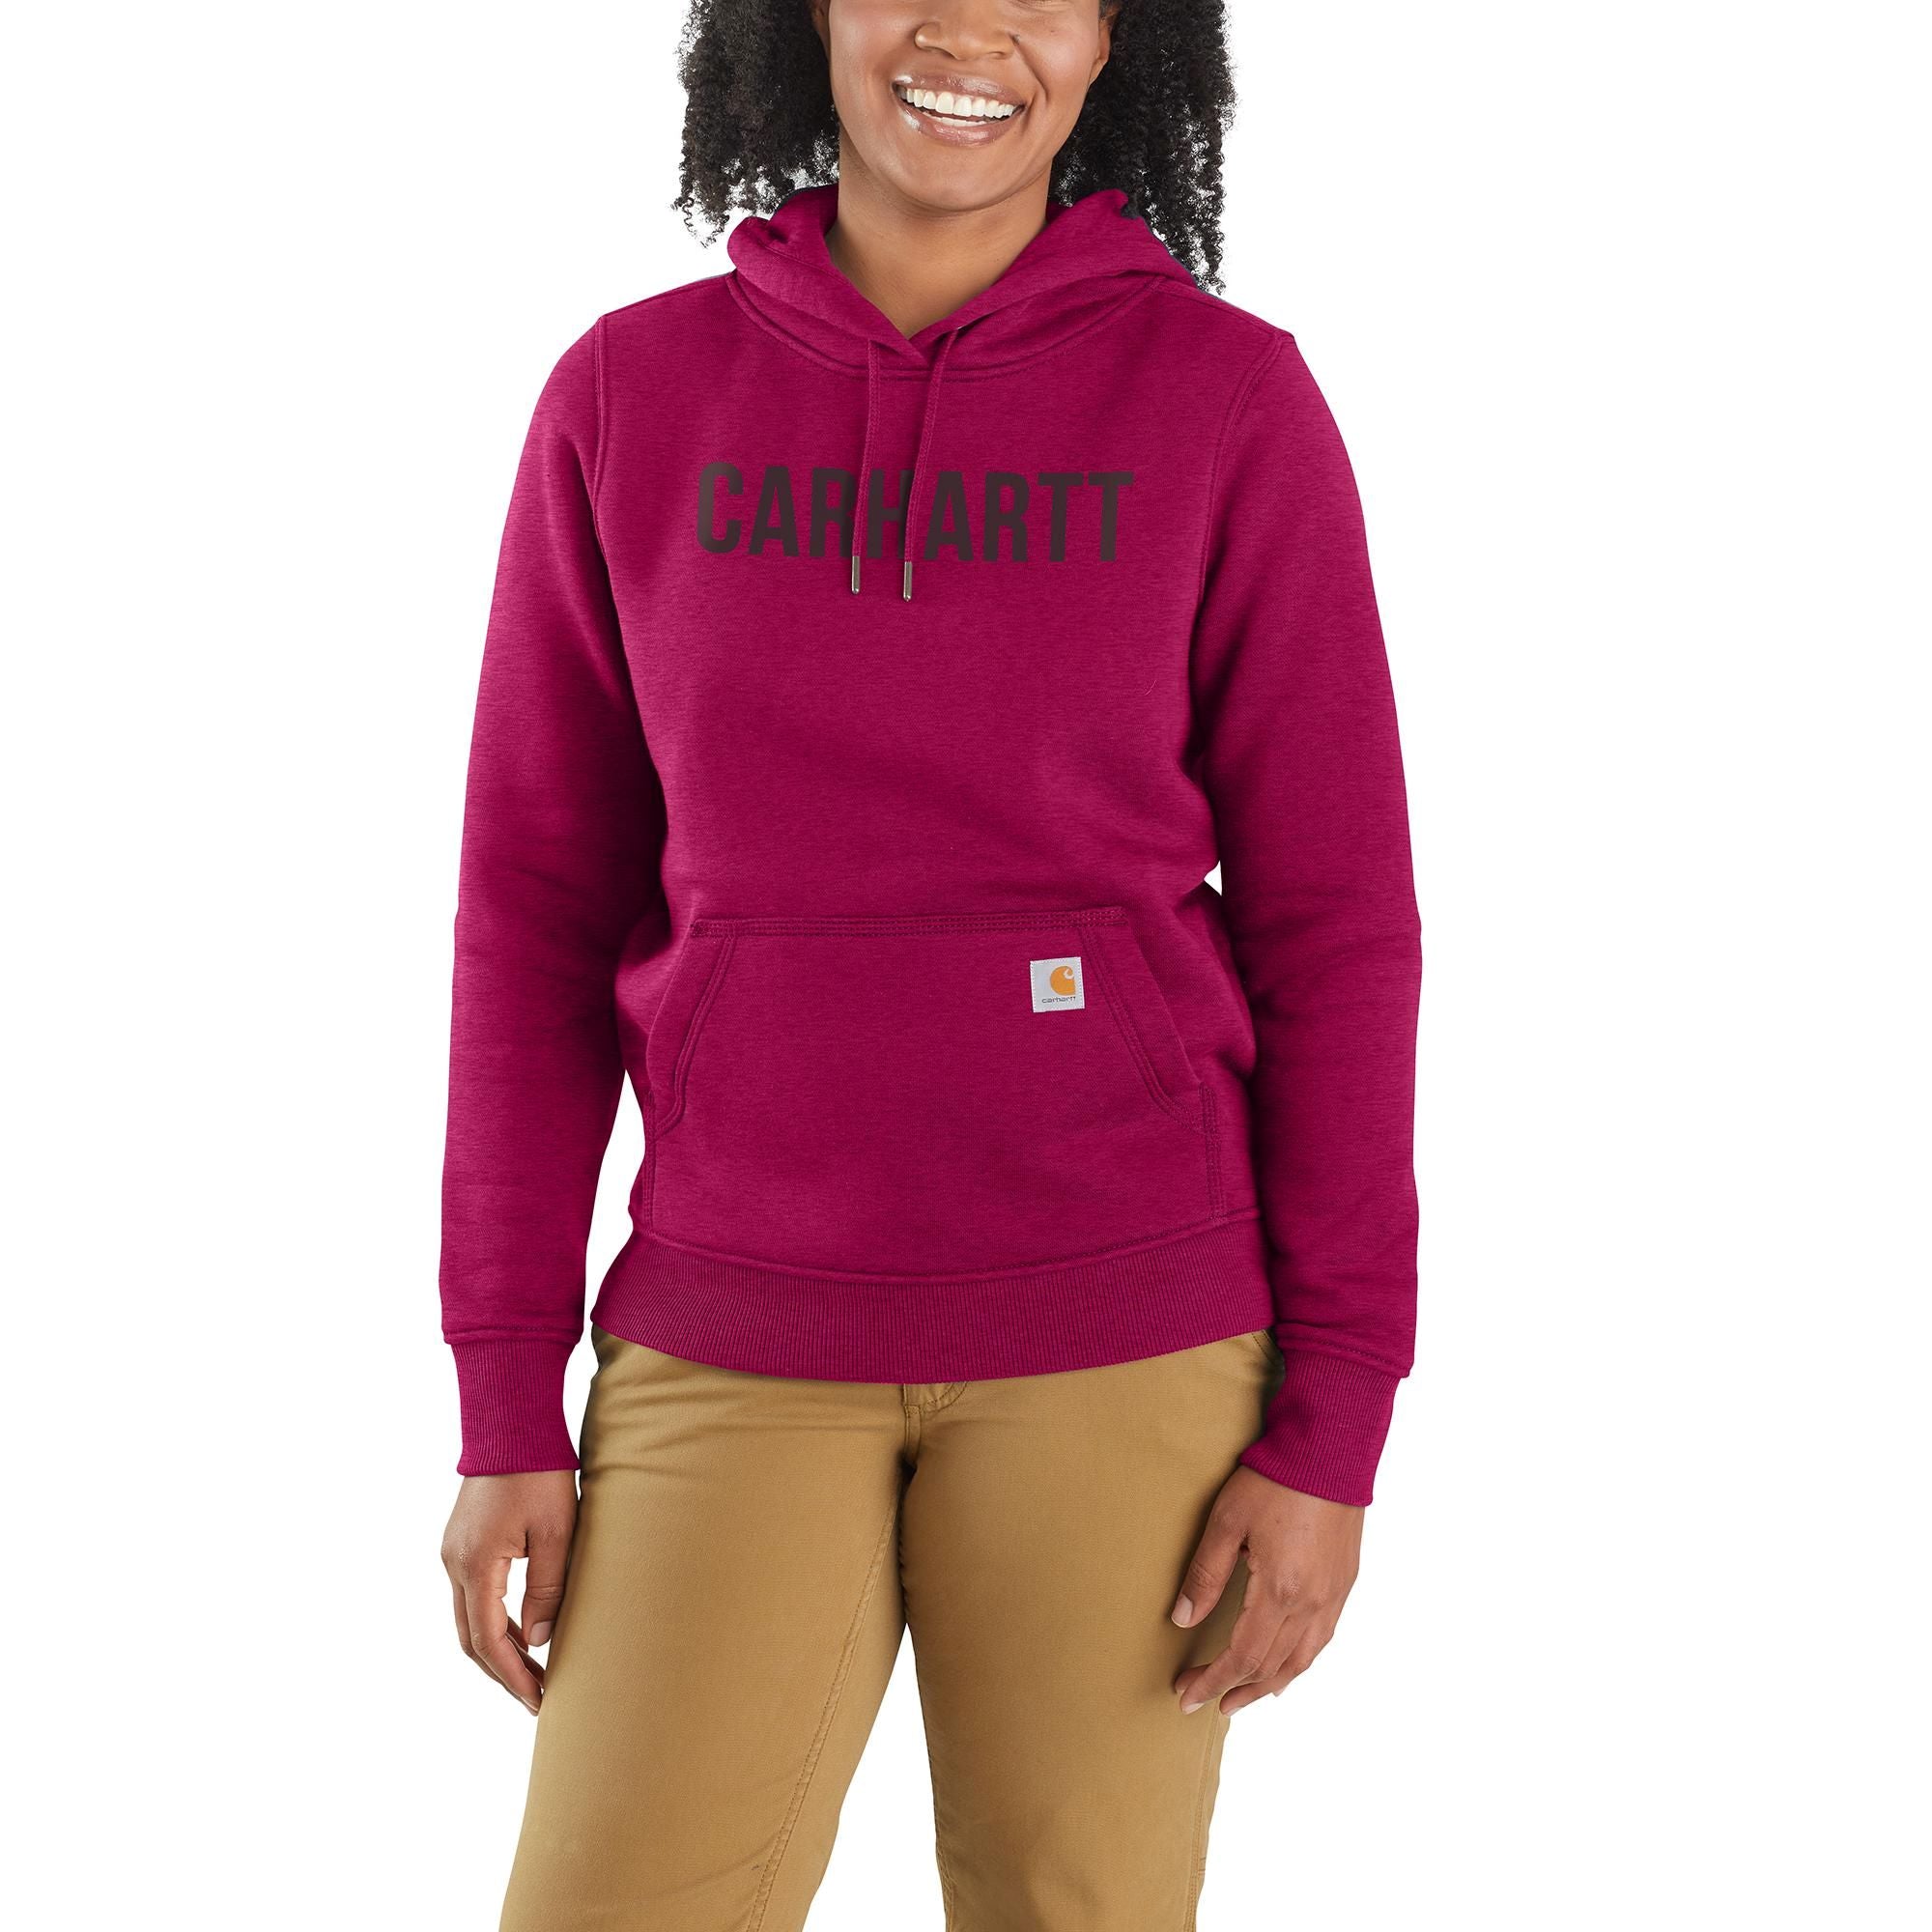 Carhartt Relaxed Fit Midweight Graphic Sleeve Sweatshirt for Women